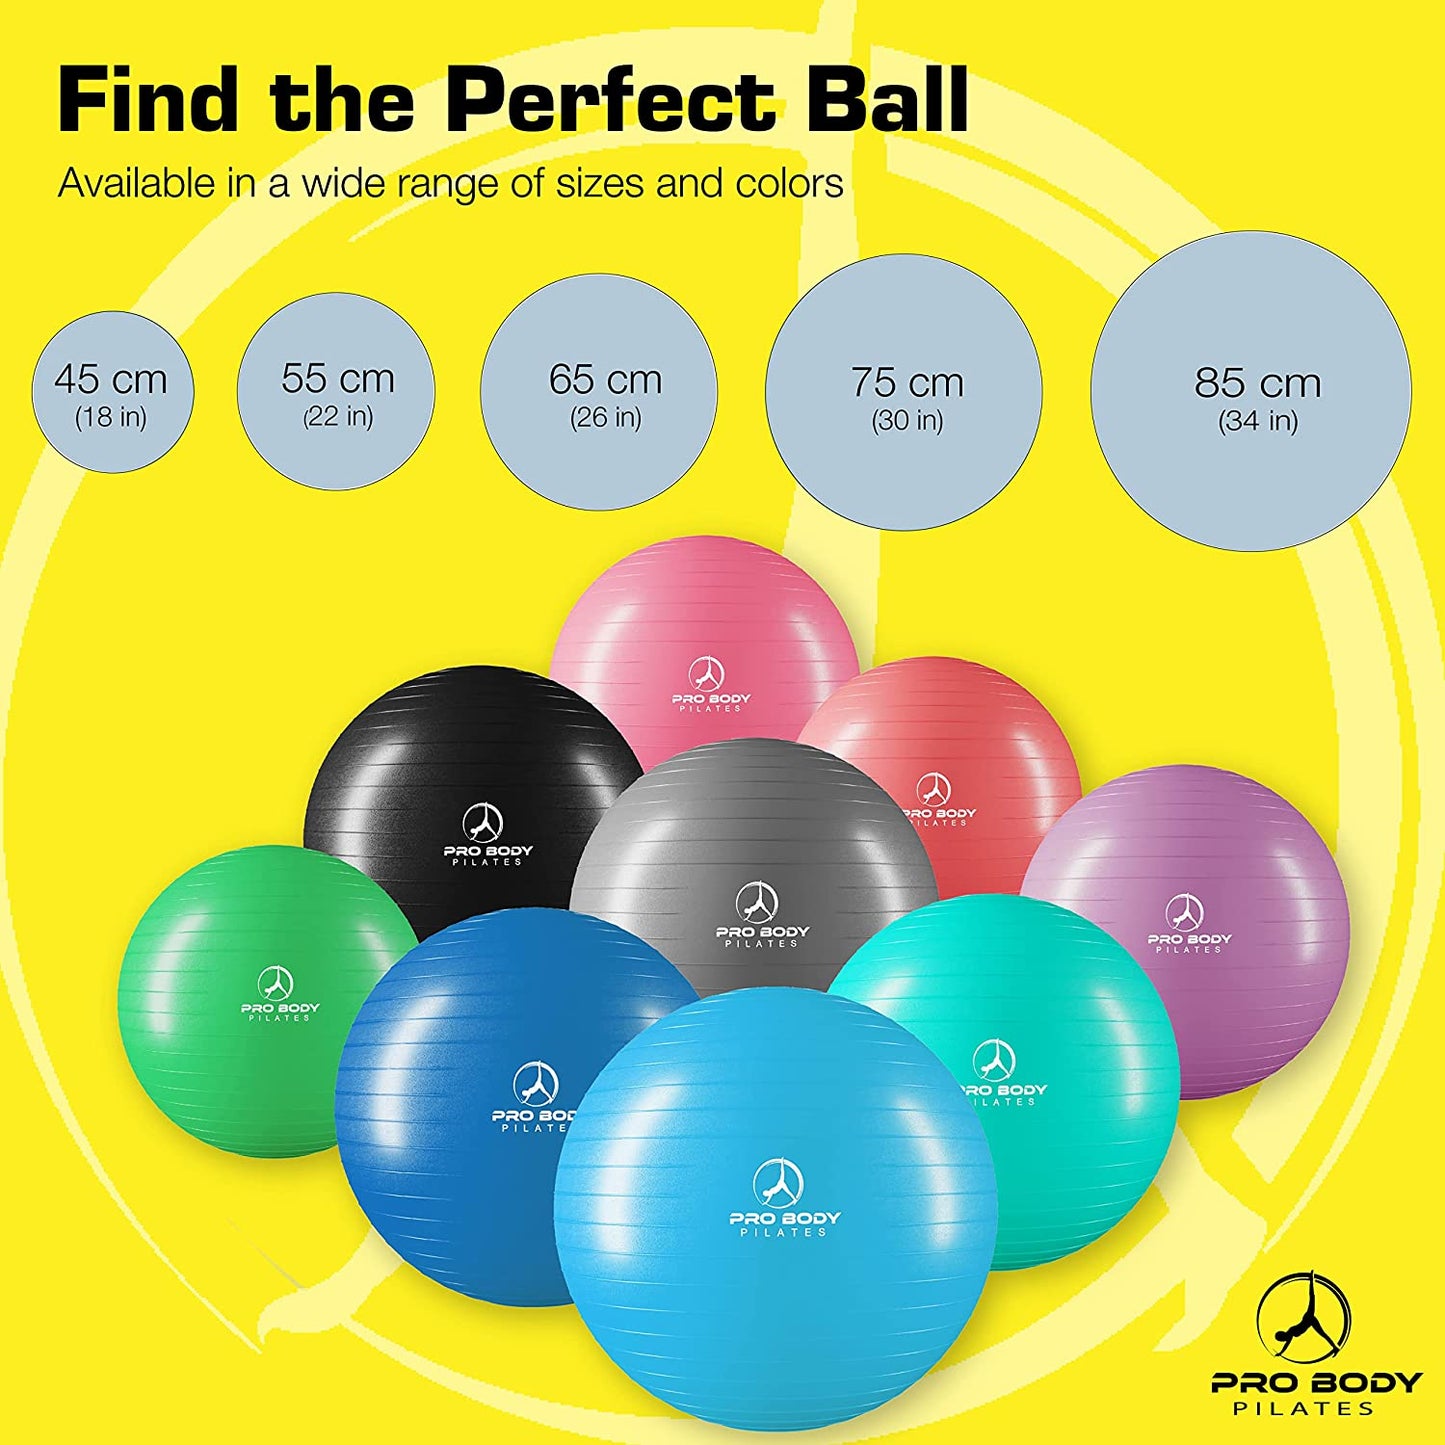 Yoga Ball for Pregnancy, Fitness, Balance, Workout at Home, Office and Physical Therapy (Aqua)